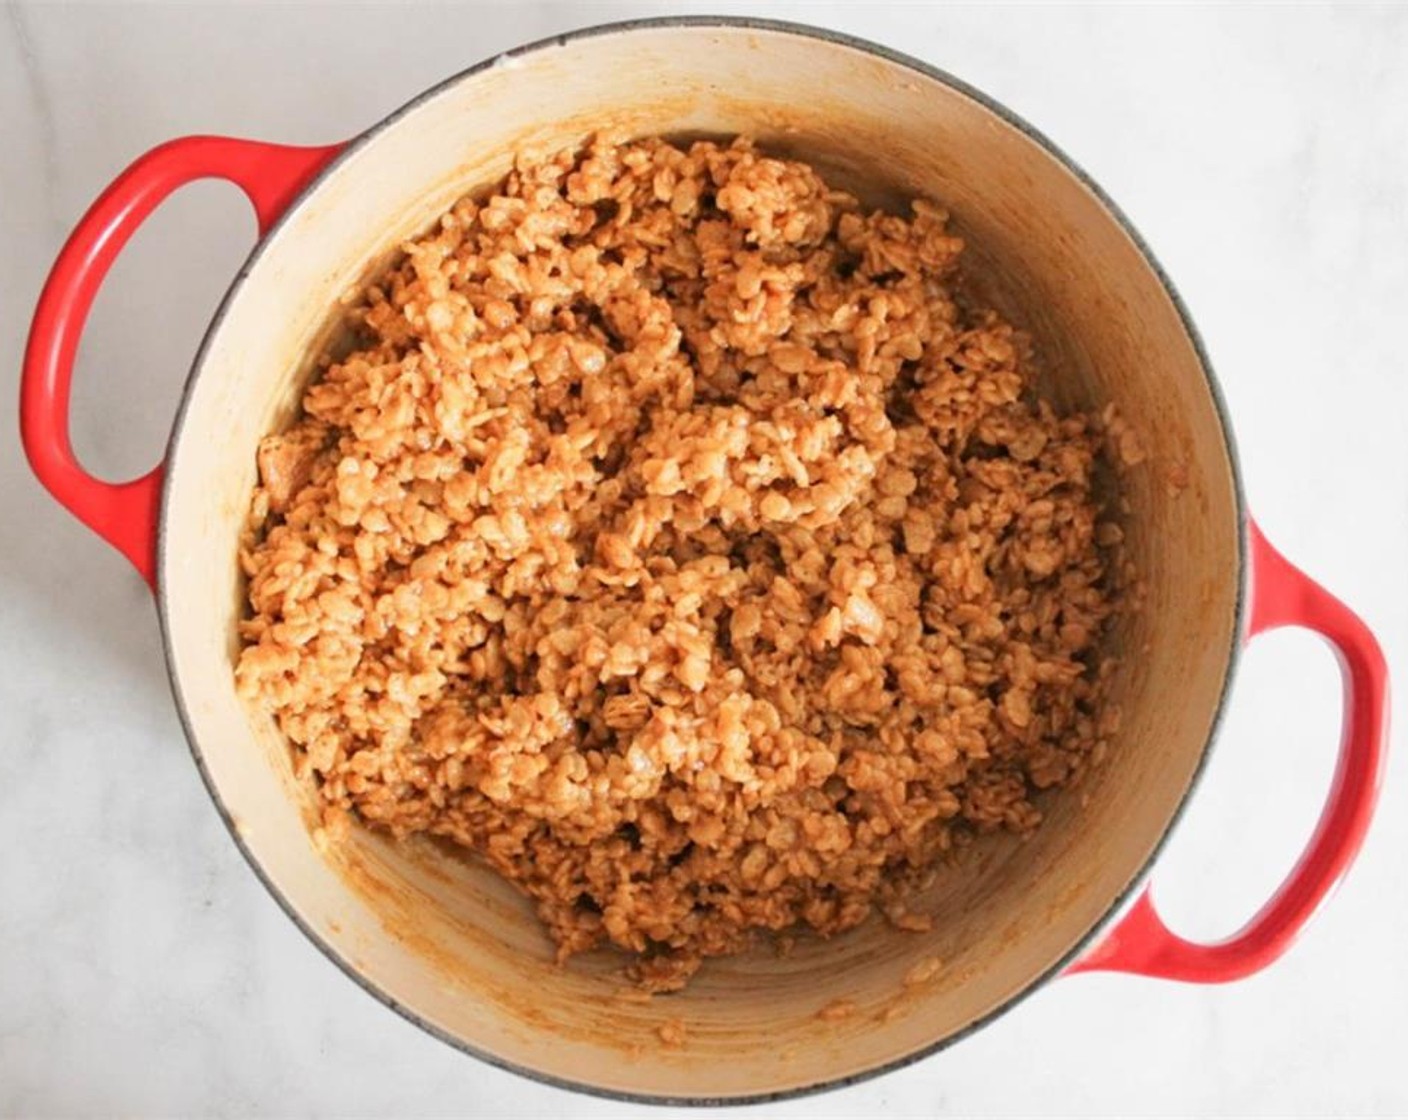 step 2 Turn the heat down to low and stir in the Canned Pumpkin Purée (1/4 cup) and Pumpkin Pie Spice (3/4 tsp).  Turn off the heat and stir in the Rice Krispies® Cereal (5 cups) and crushed Graham Crackers (1/3 cup).